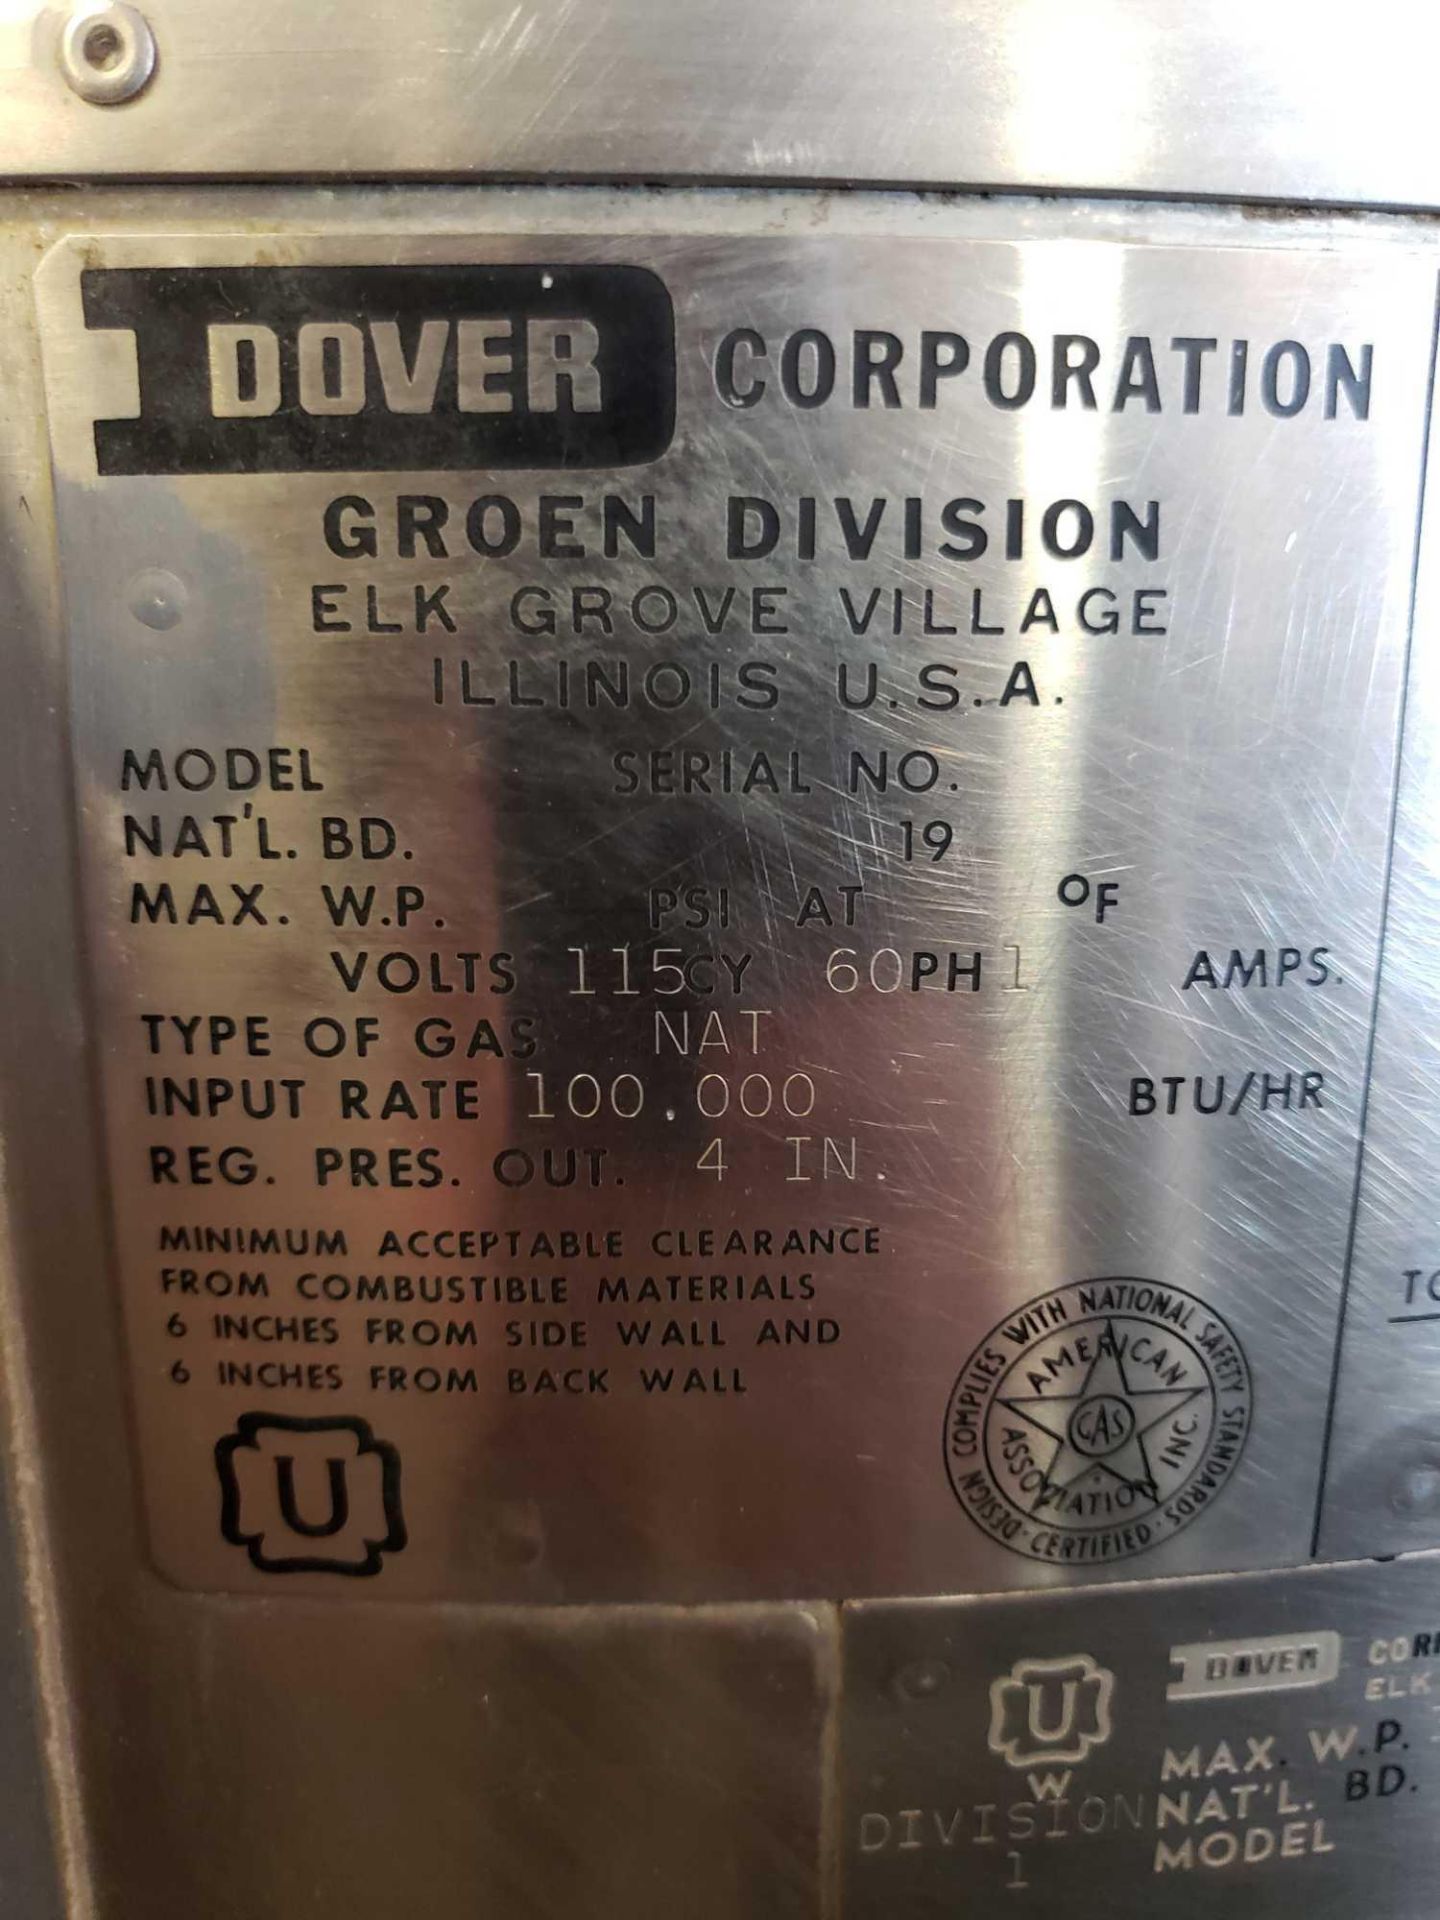 Groen model AH/1-40, 40 gallon, nat gas, 100k btu (unmarked but appears to be this model) - Image 2 of 8